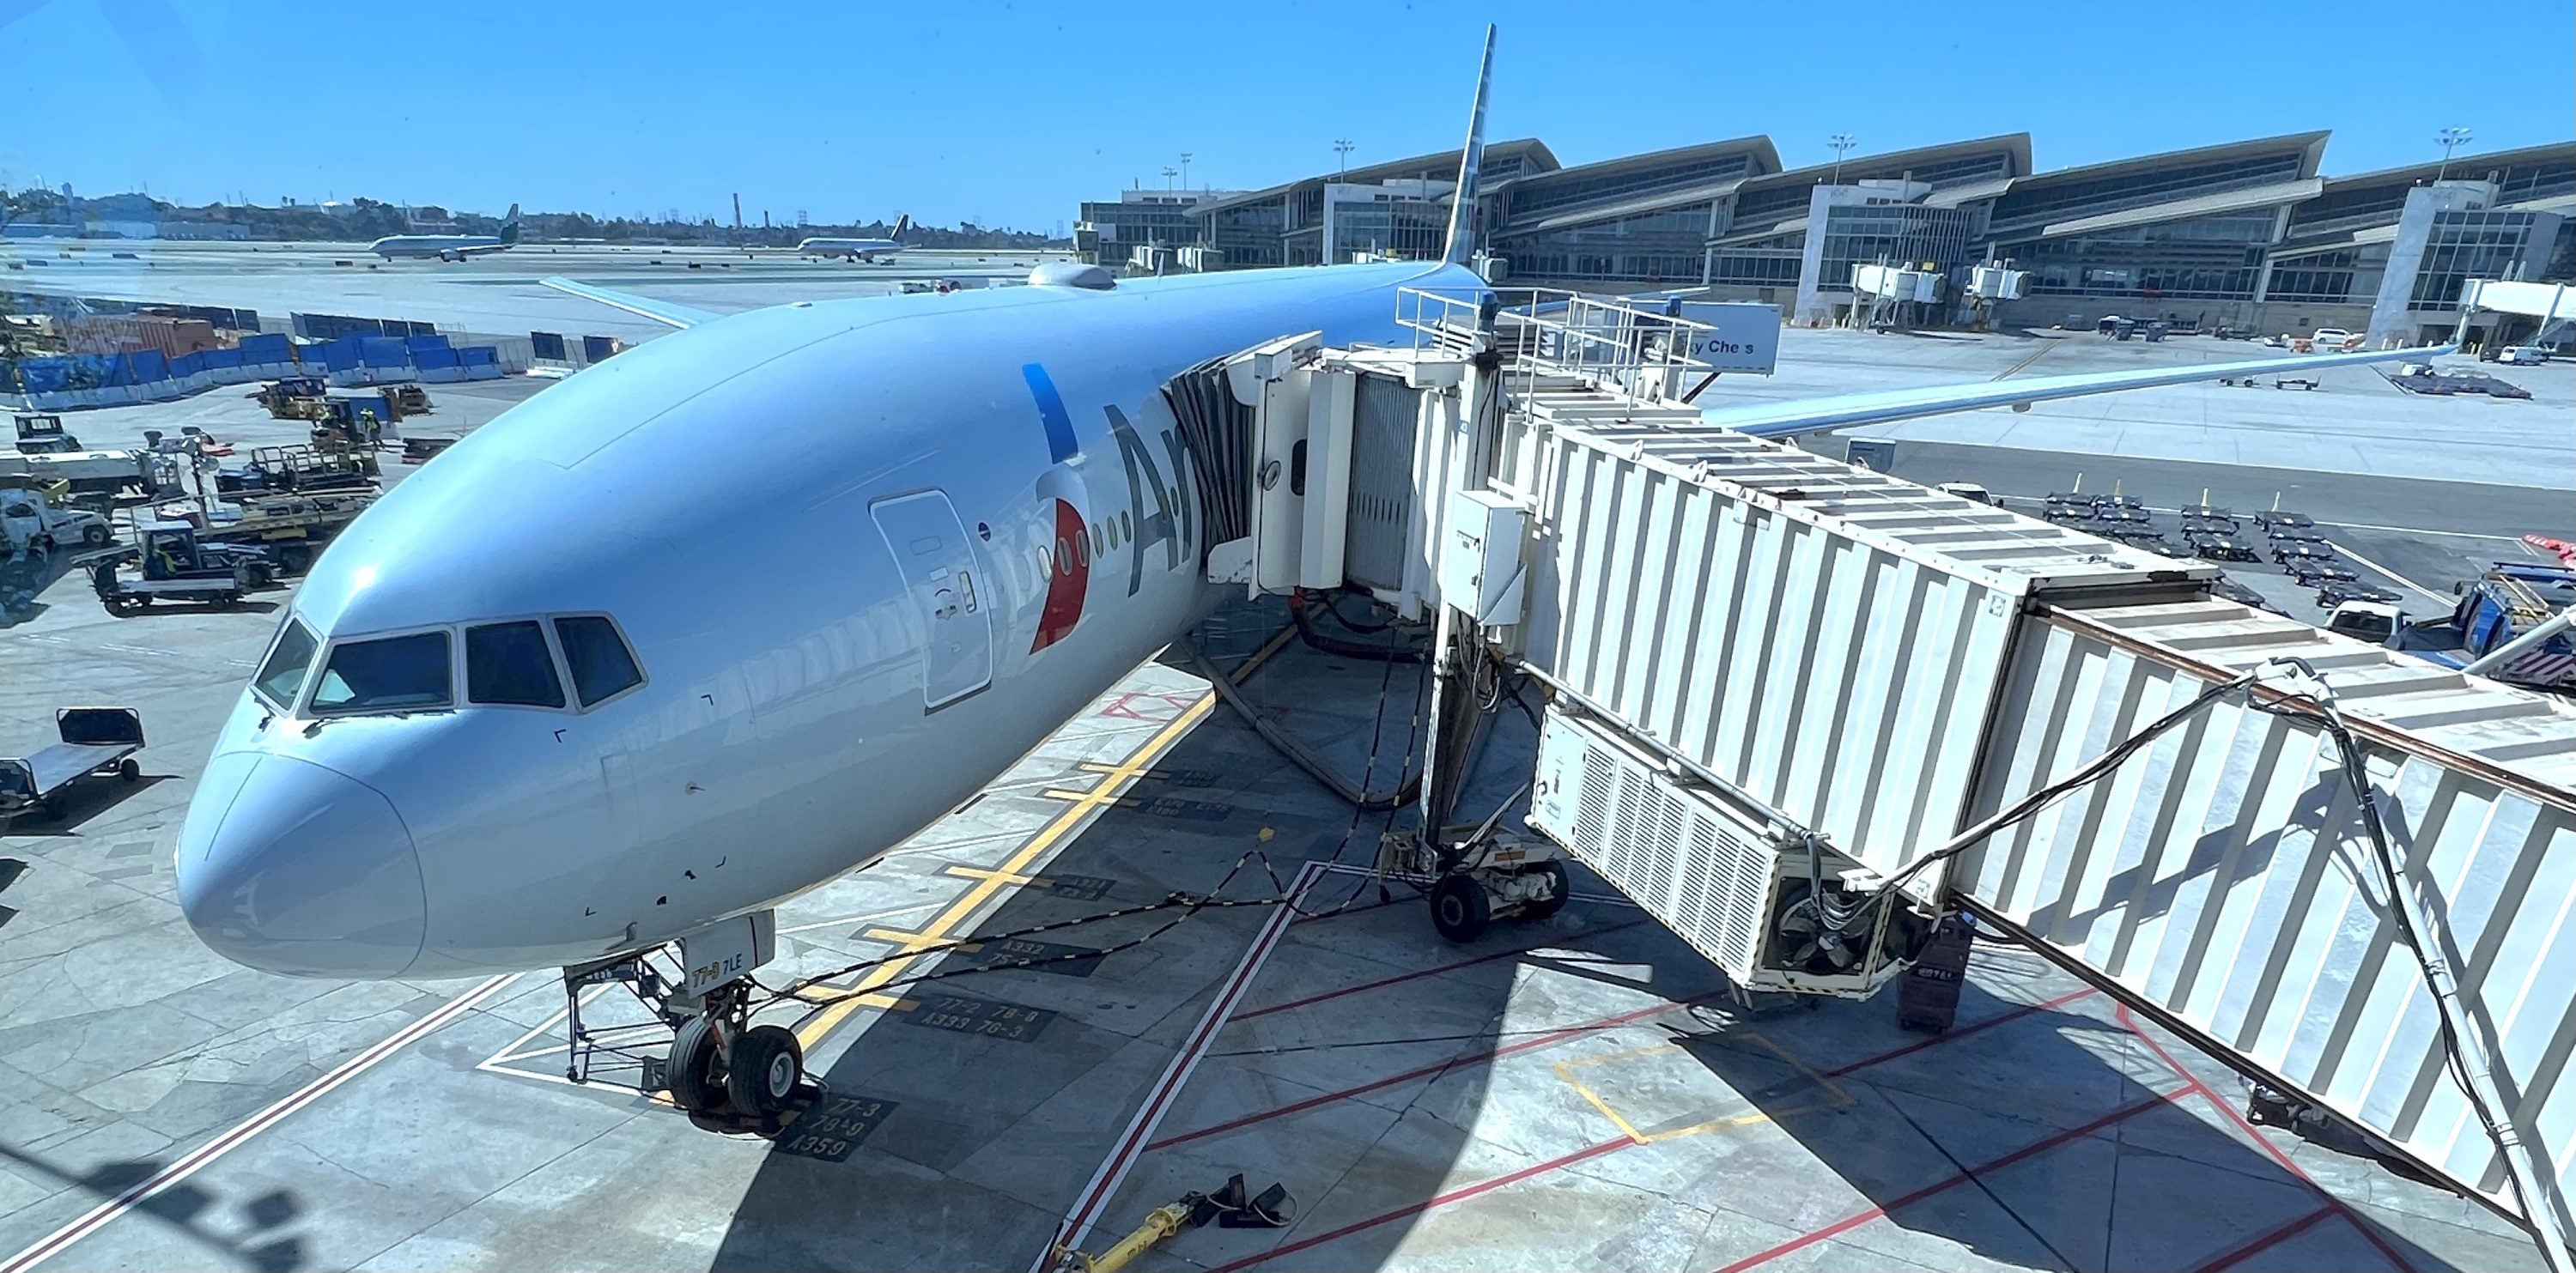 American Airlines Flagship First LAX Boeing 777 300